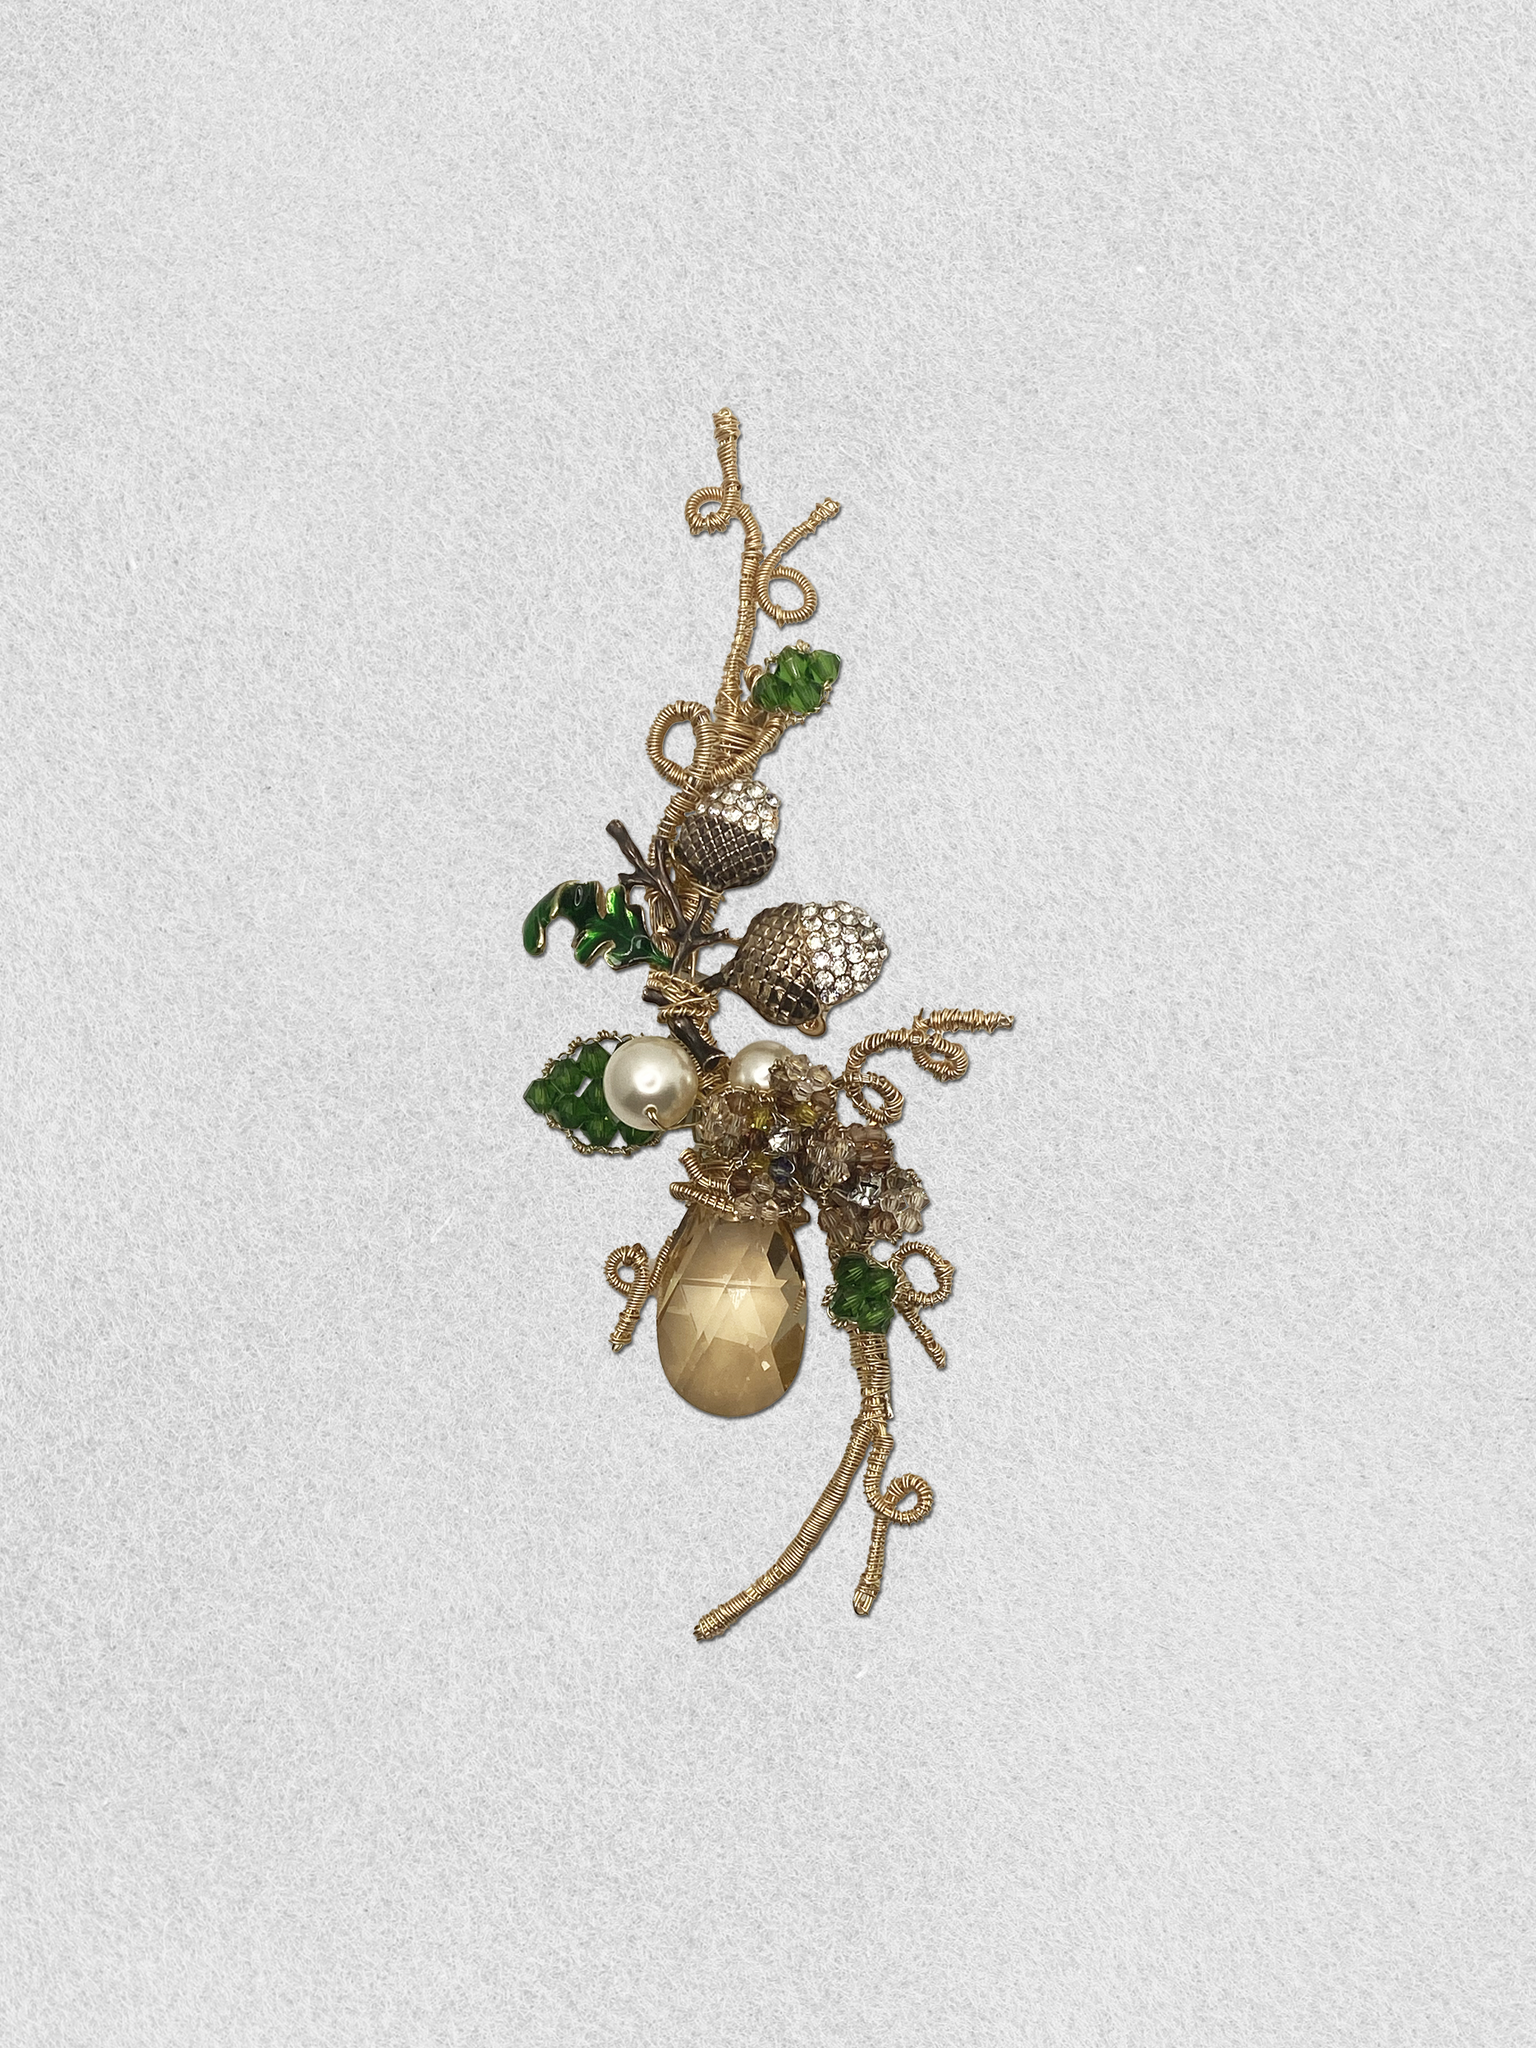 Men's Lapel Pin - Two Nuts in a Tree (Jeweled Acorns)